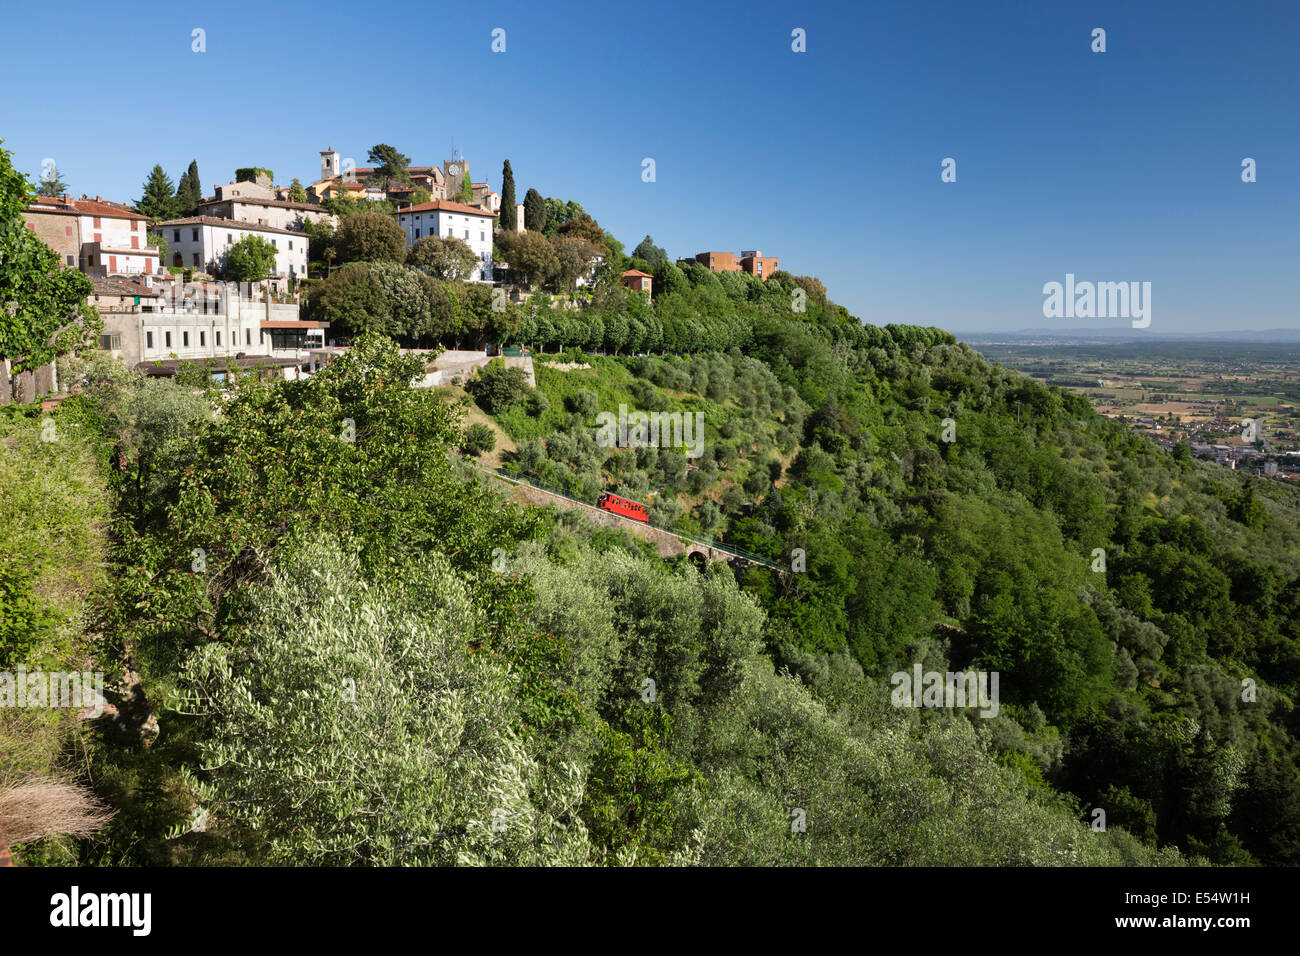 Funicular below hill top town, Montecatini Alto, Tuscany, Italy, Europe Stock Photo